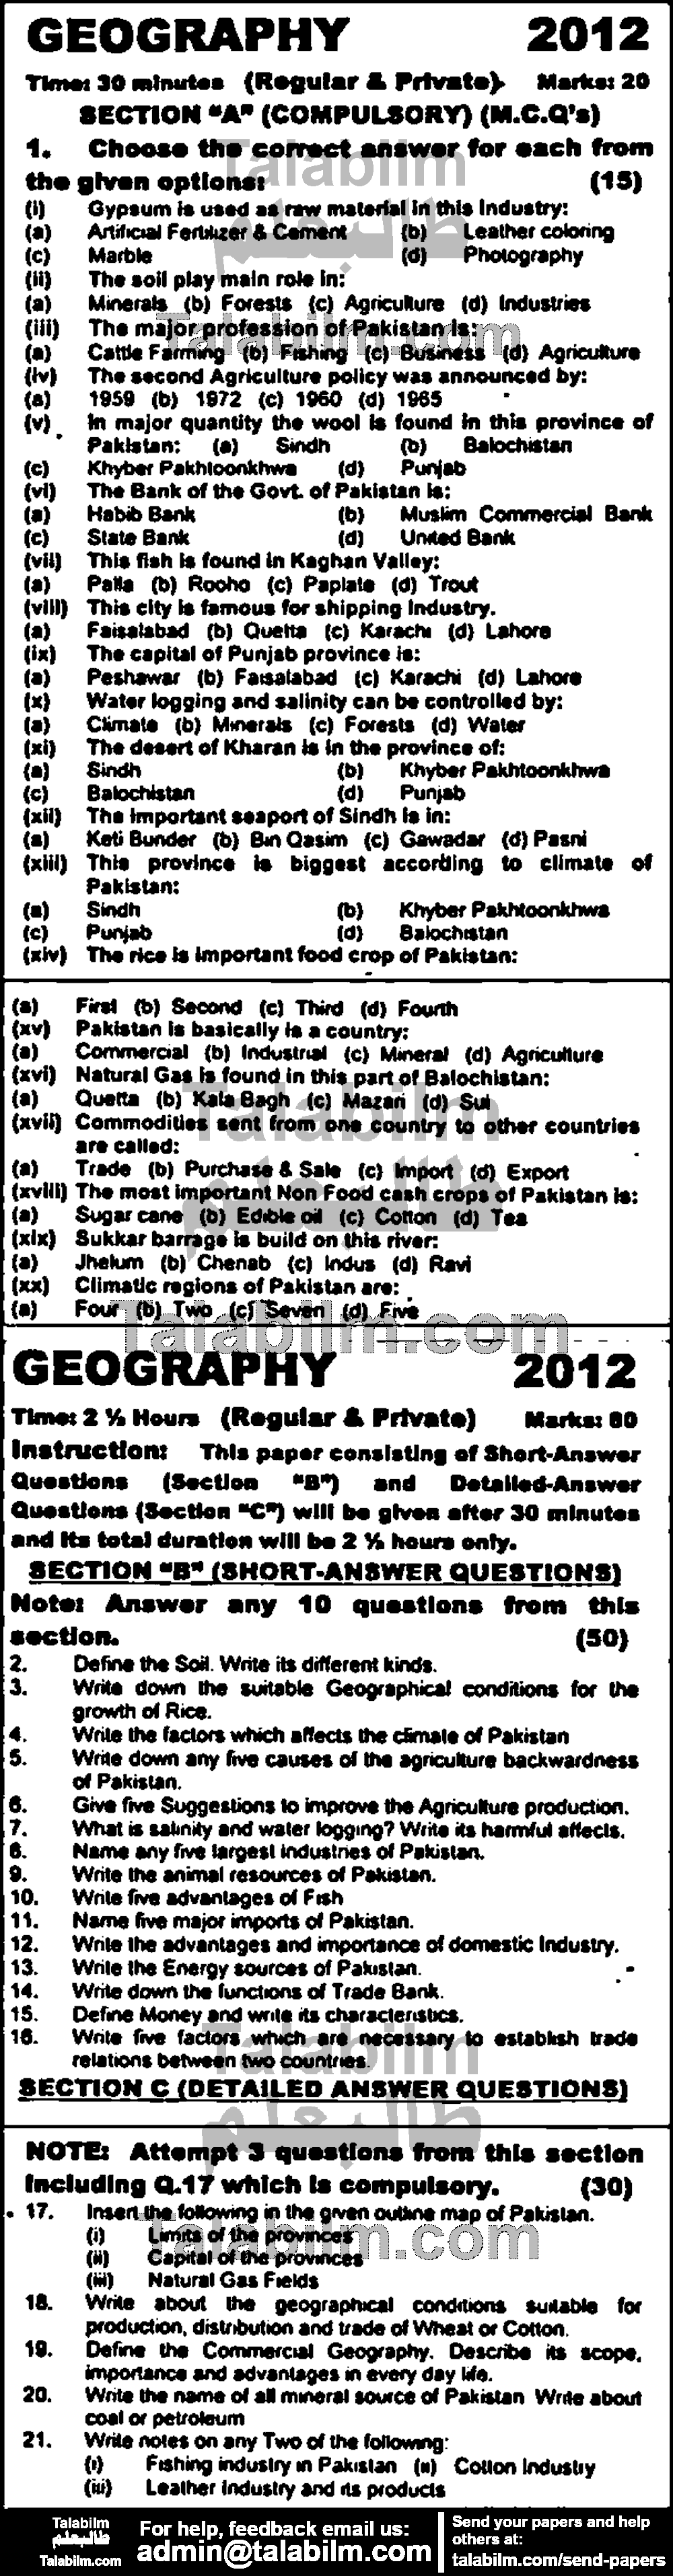 Commercial Geography 0 past paper for English Medium 2012 Group-I